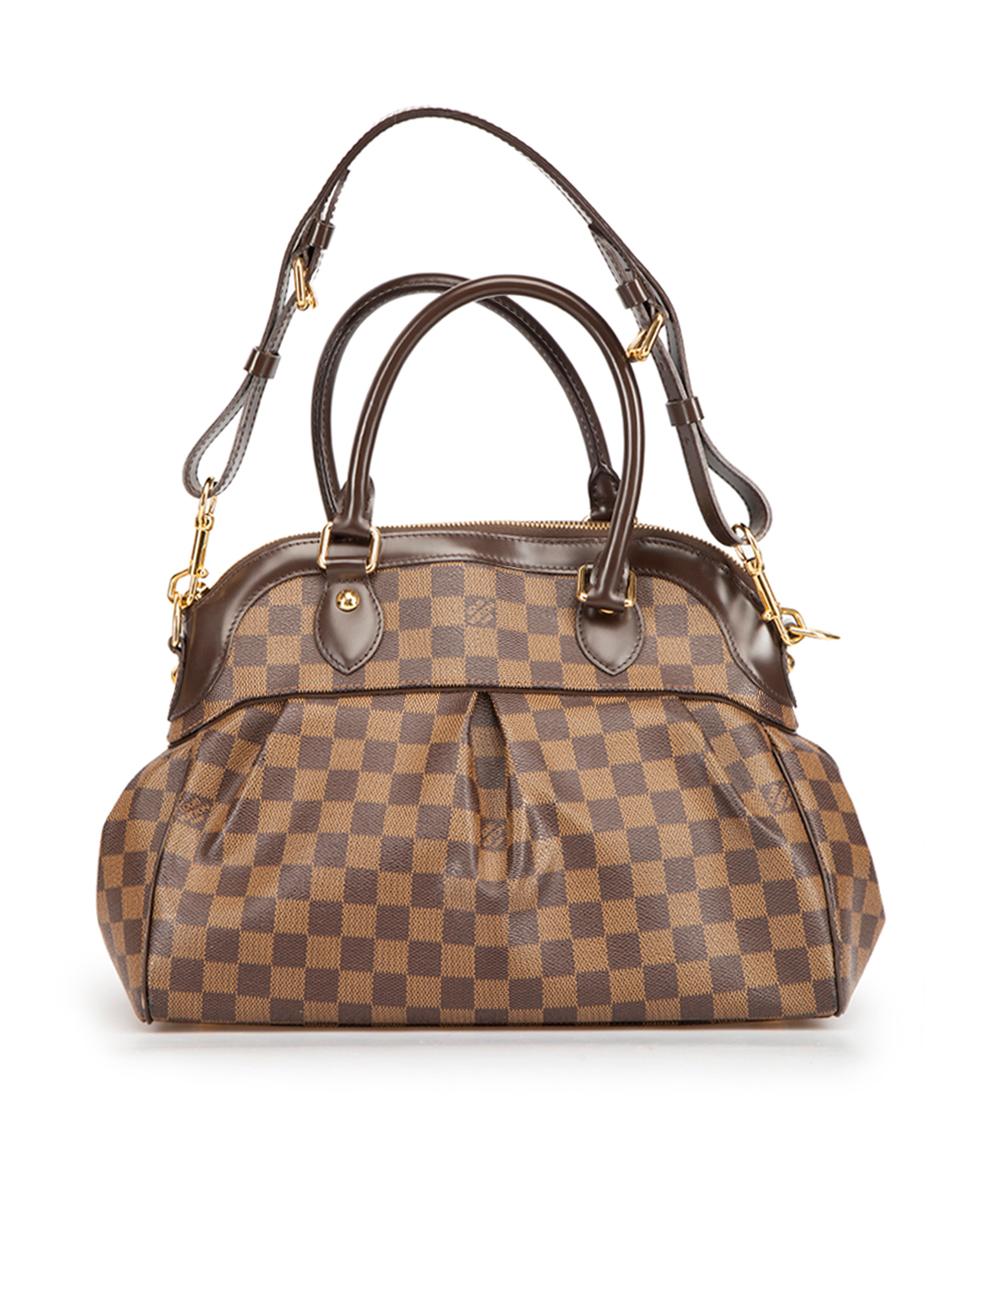 Louis Vuitton Women's Brown Damier Ebene Trevi Bag In Good Condition For Sale In London, GB